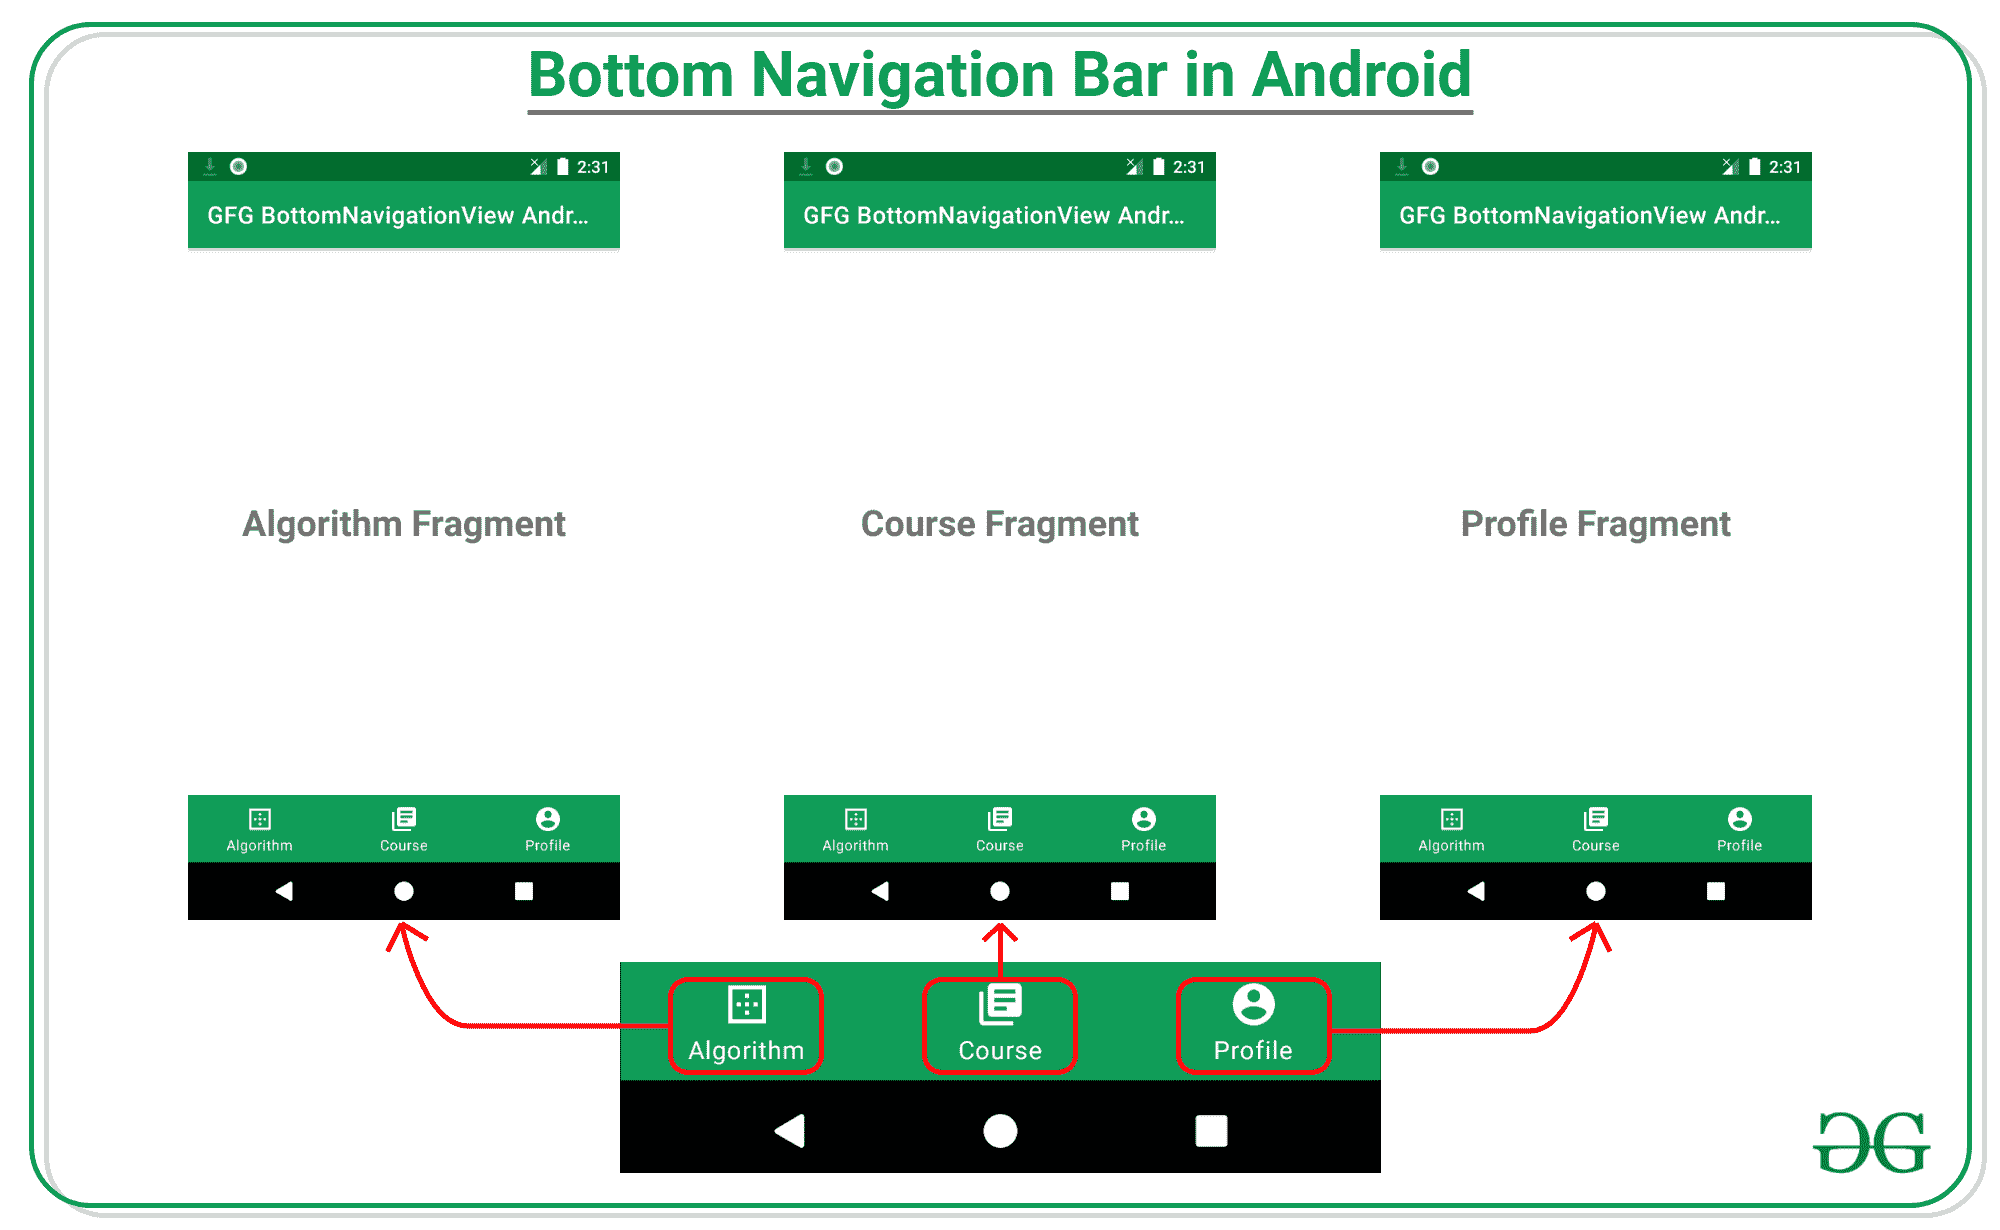 BottomNavigationView in Android